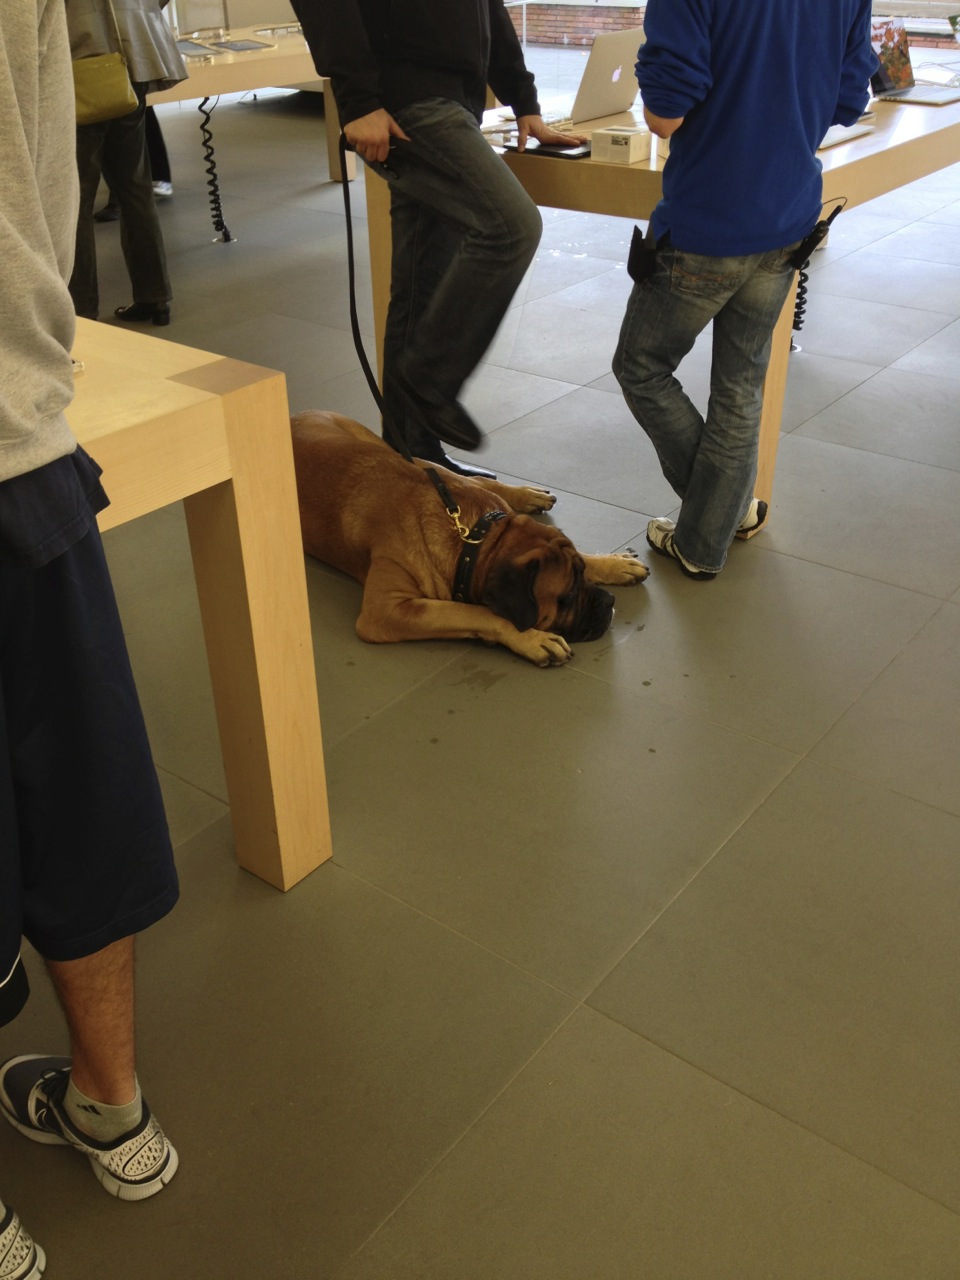 Dog's life (at the Apple store)